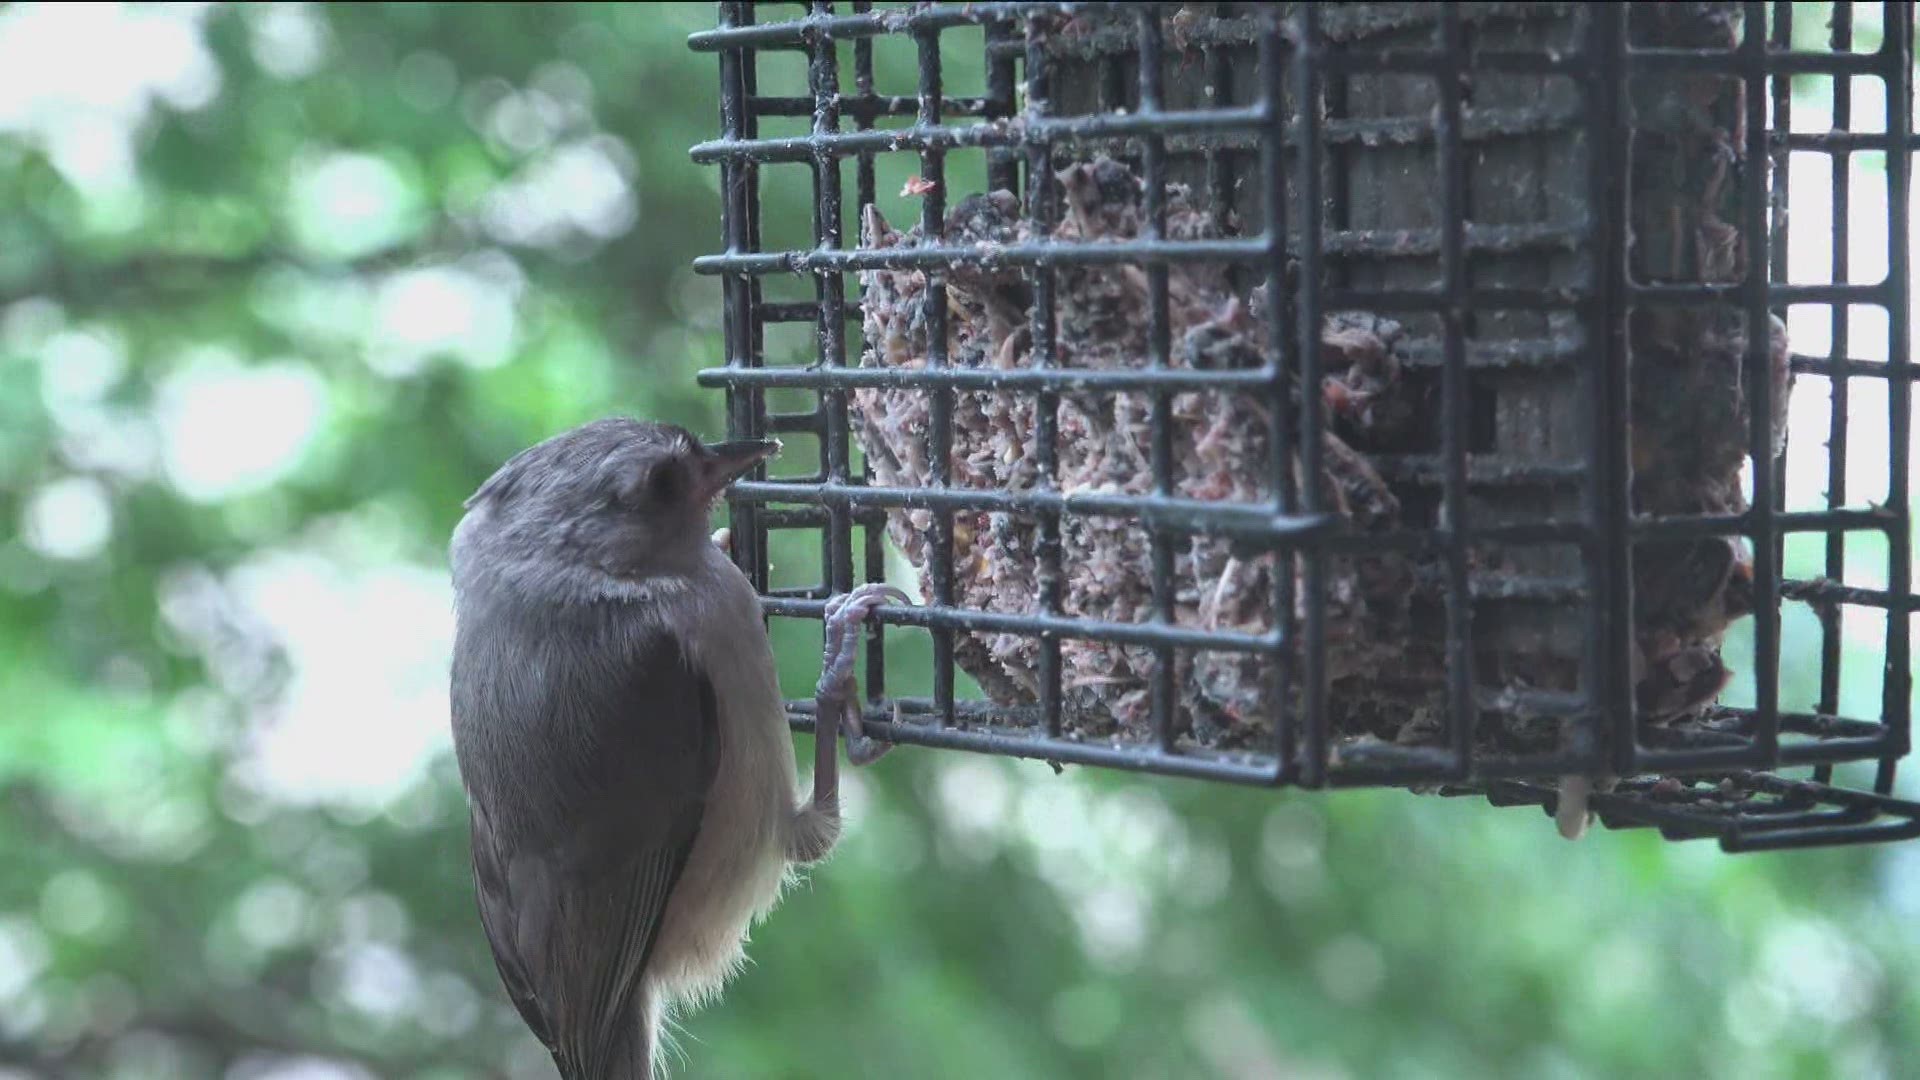 A salmonella outbreak among songbirds in the western U.S. has pushed Idaho Fish and Game to ask residents to take down bird feeders.